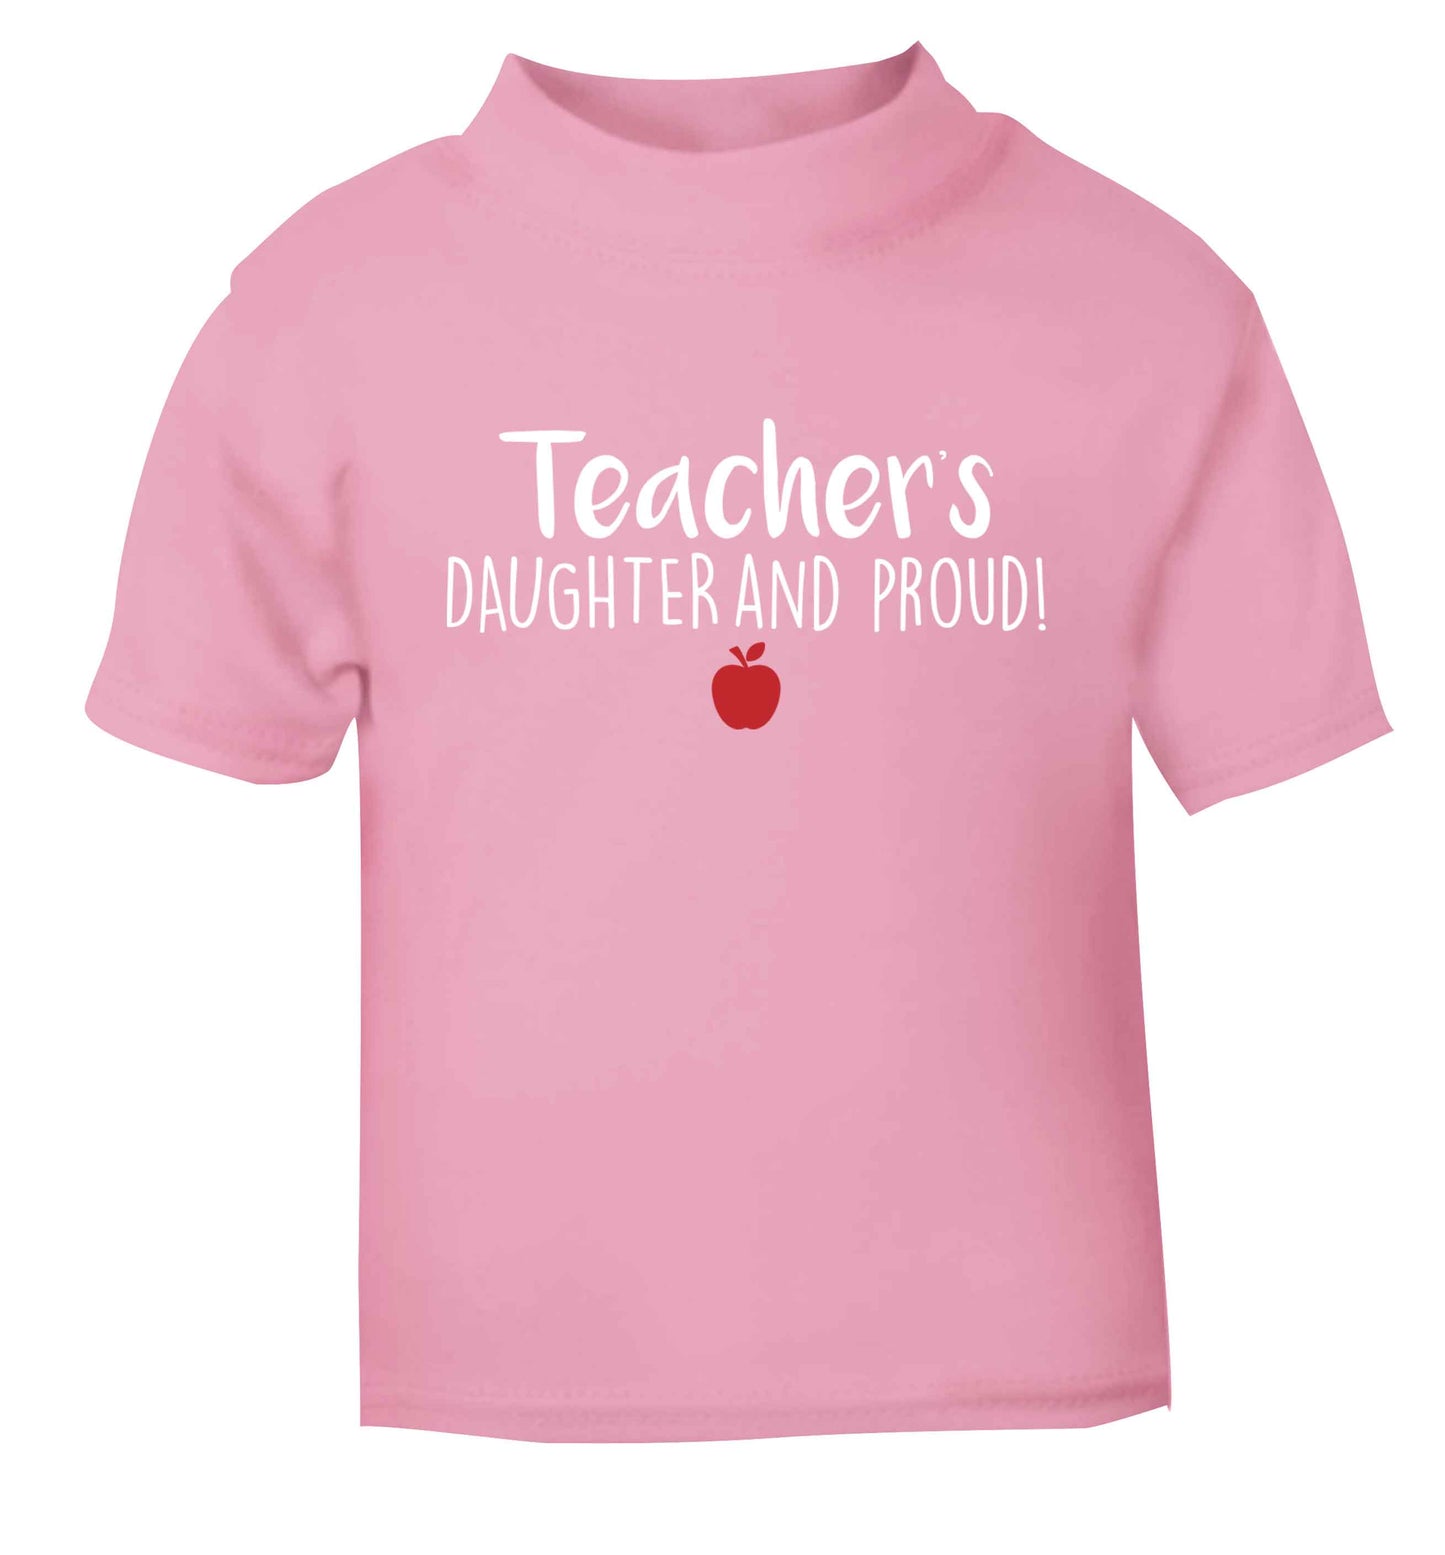 Teachers daughter and proud light pink baby toddler Tshirt 2 Years